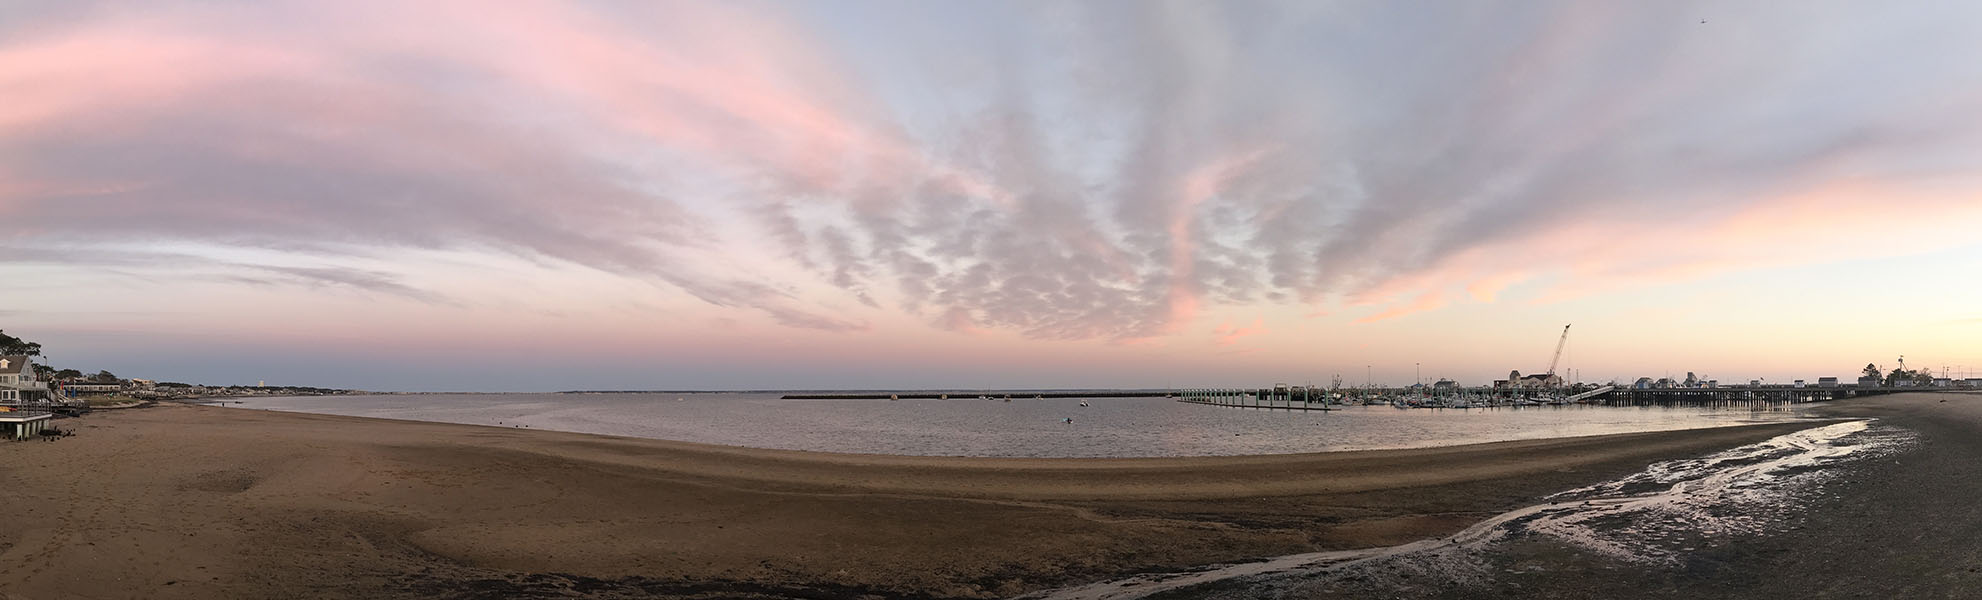 Colorpanoramic Photo of Beach, Harbor, and Sunset.